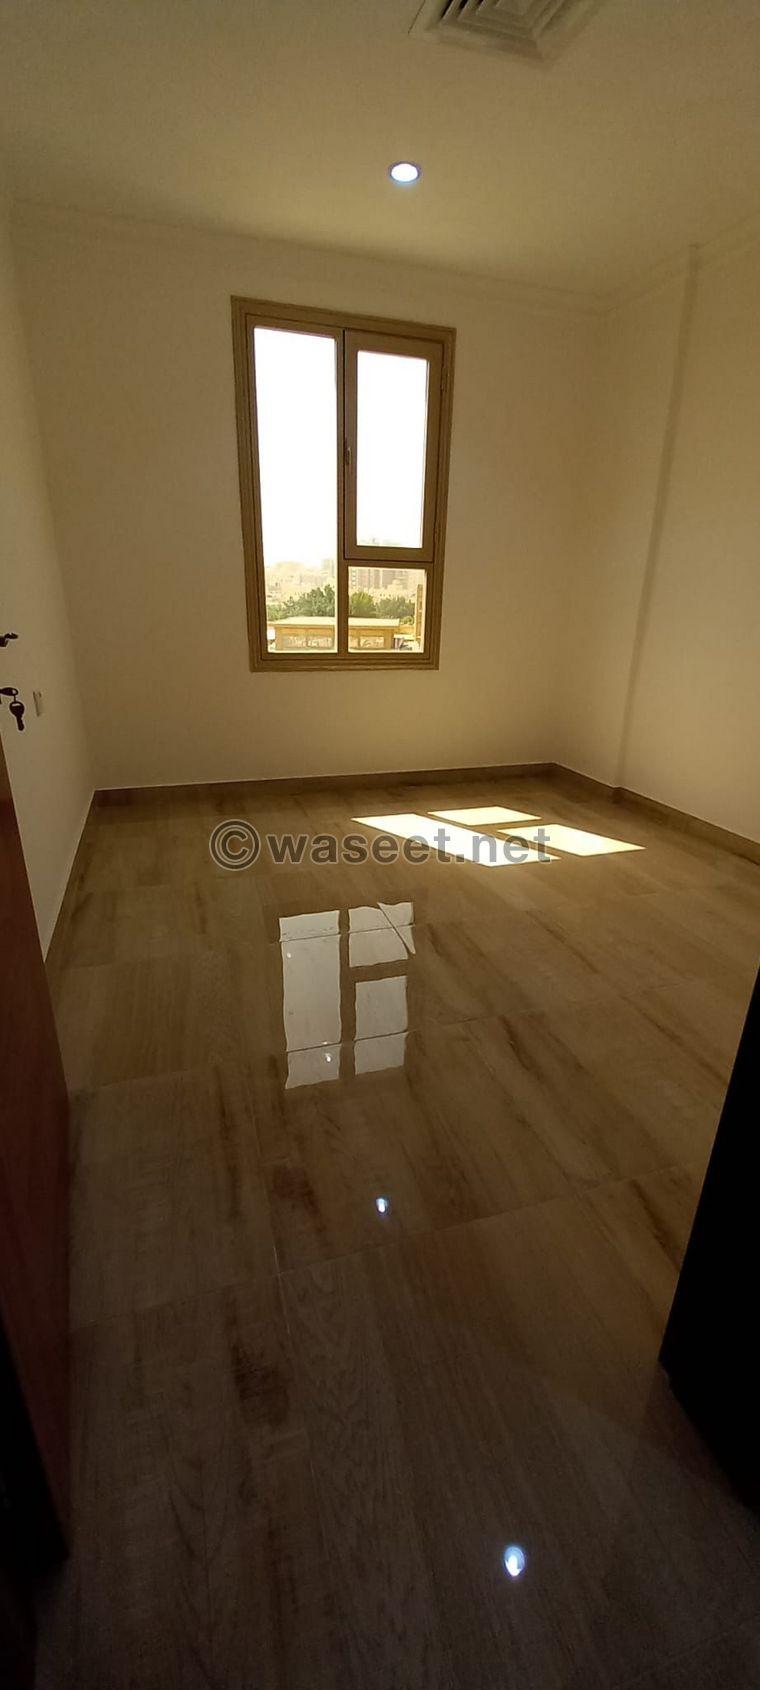 For sale, an apartment in Al Mahbula is identical to the women's loan  0